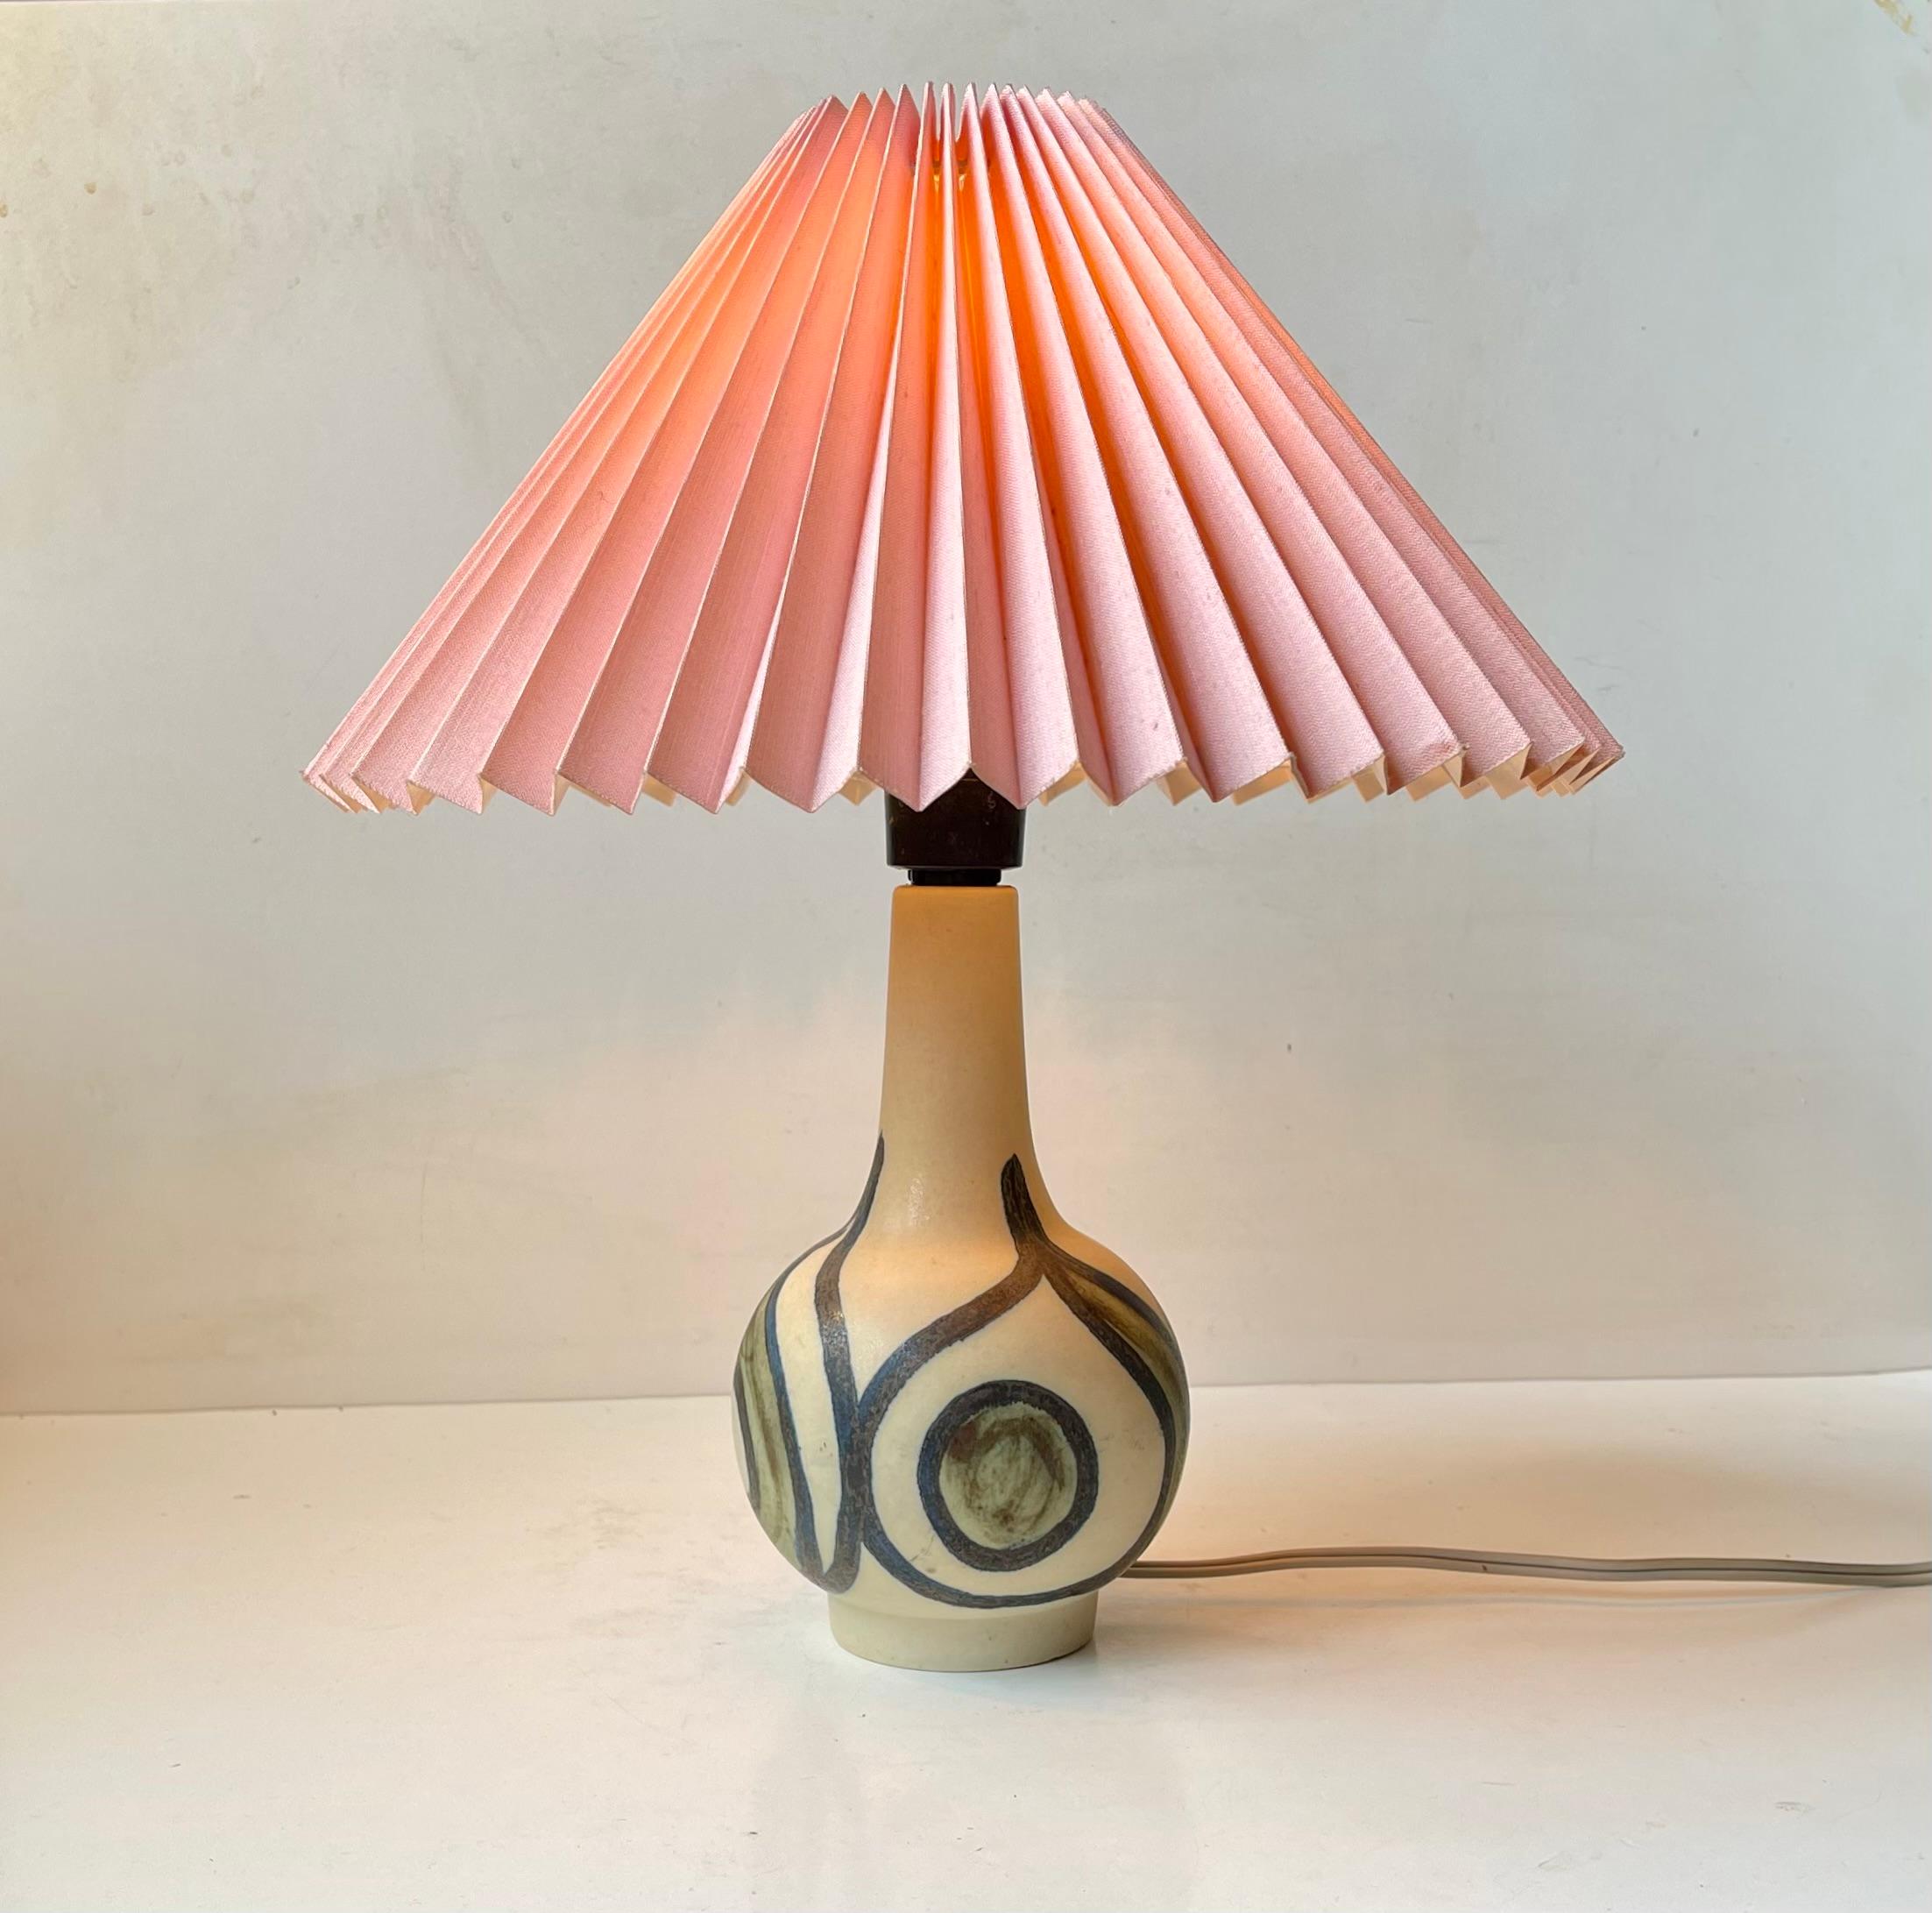 Stylish 1970s onion shaped ceramic table light decorated in earthy green, blue, black and brown glazes set in an organic abstract pattern on a creamy main-glaze. It was made in Denmark during the 1970s by either Søholm or Okela Stentøj. It has no